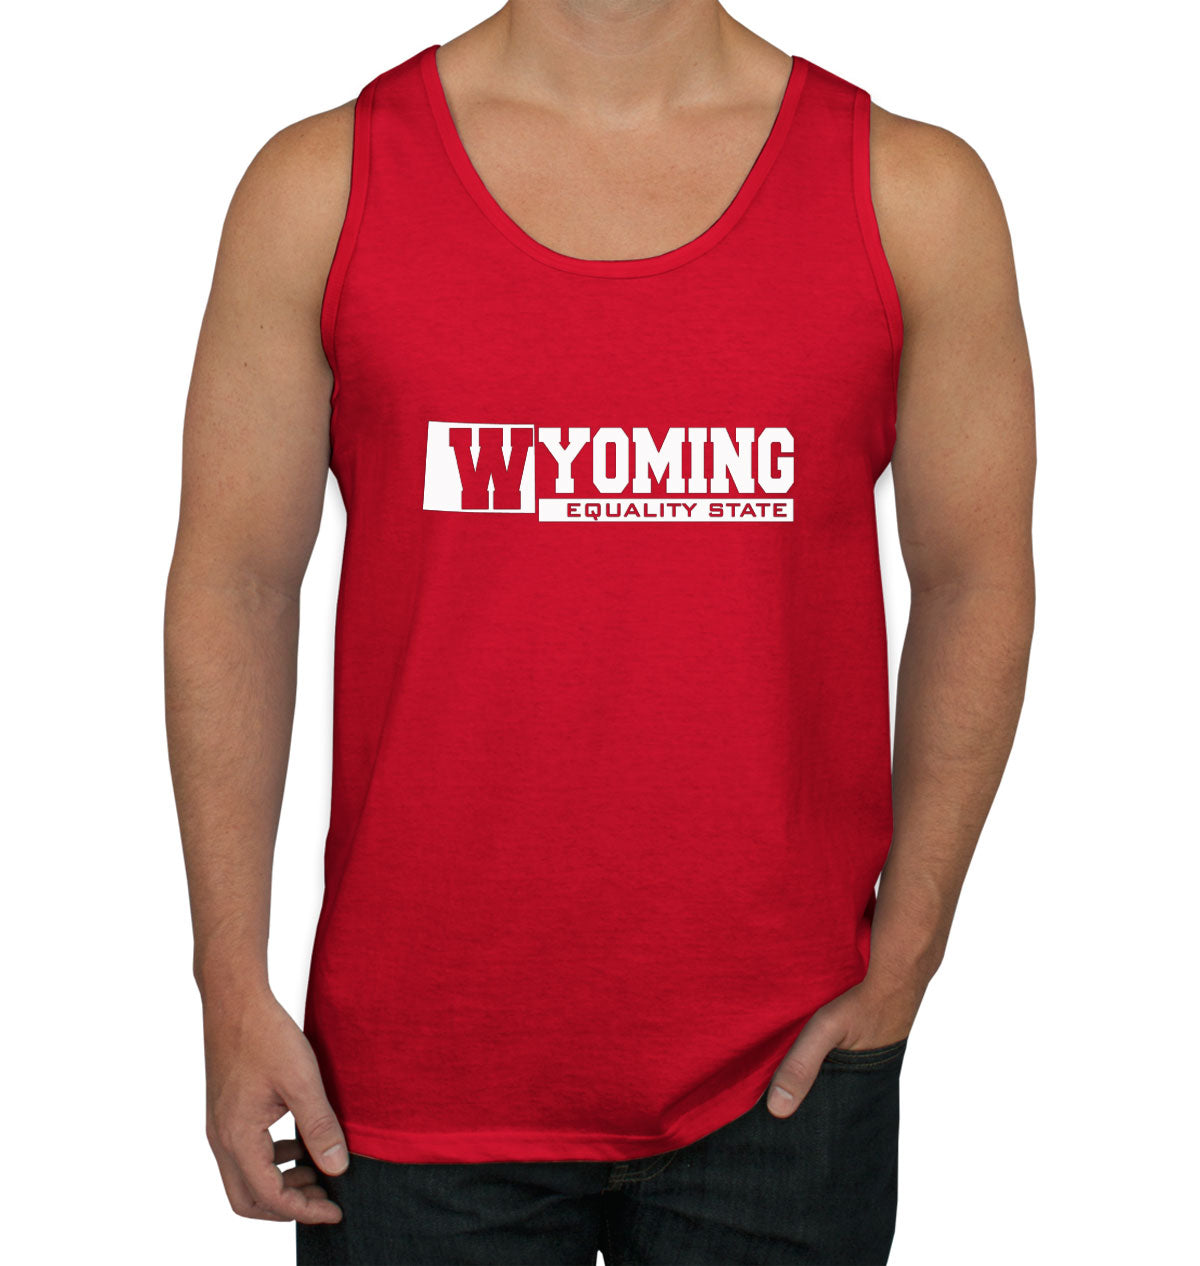 Wyoming Equality State Men's Tank Top